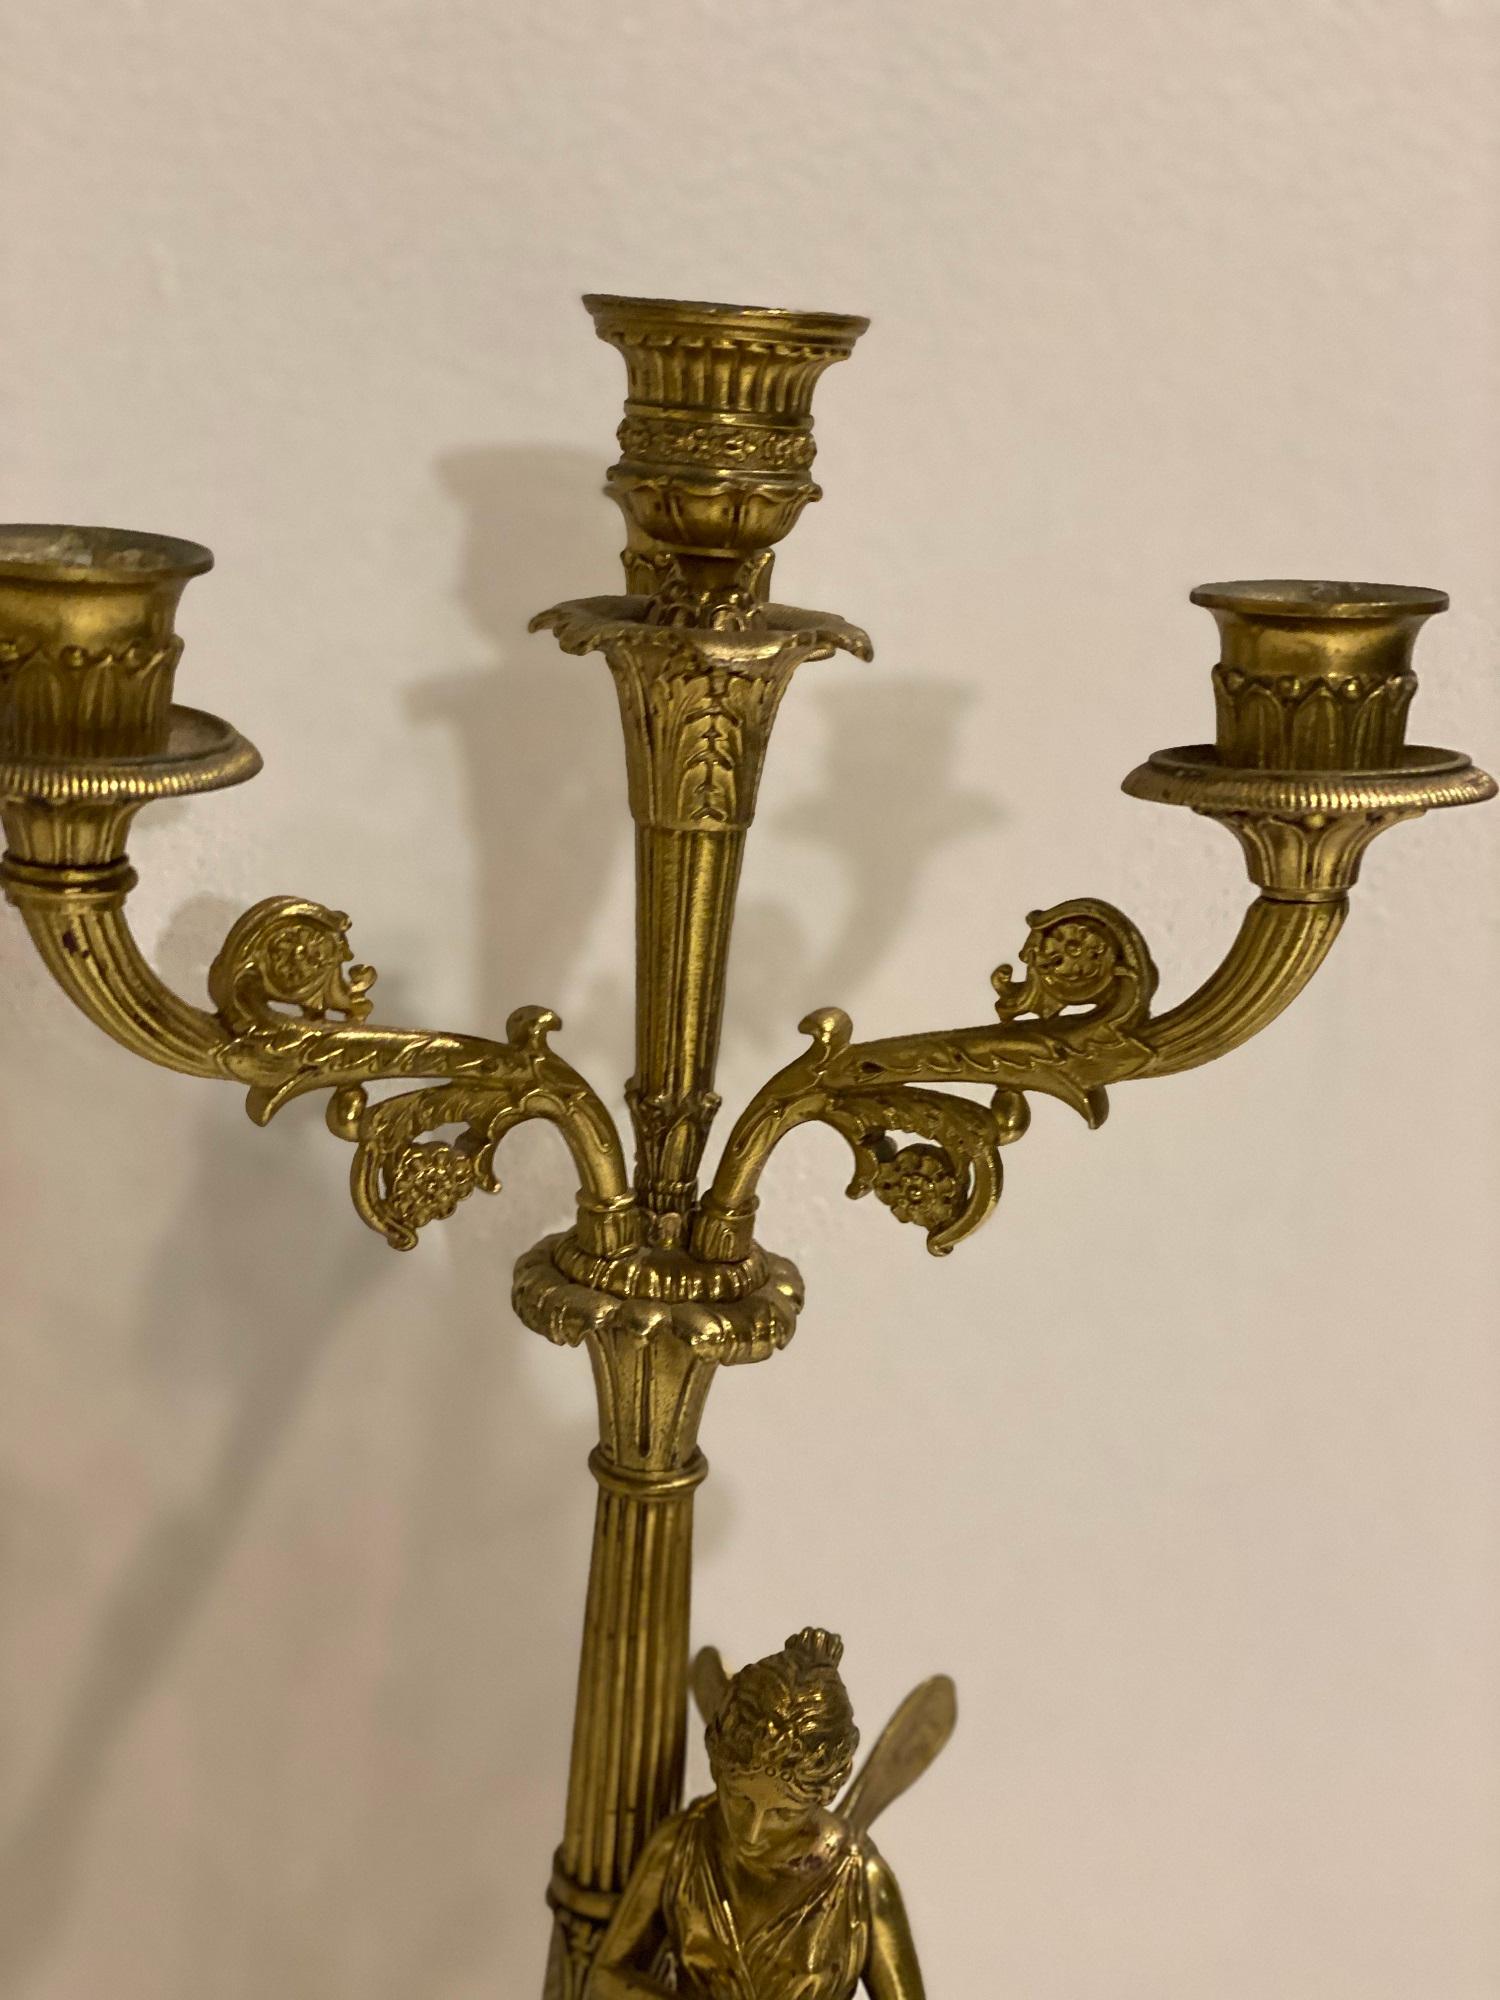 Late 19th century French Empire Bronze Candlestick Table Lamps In Good Condition For Sale In New York, NY